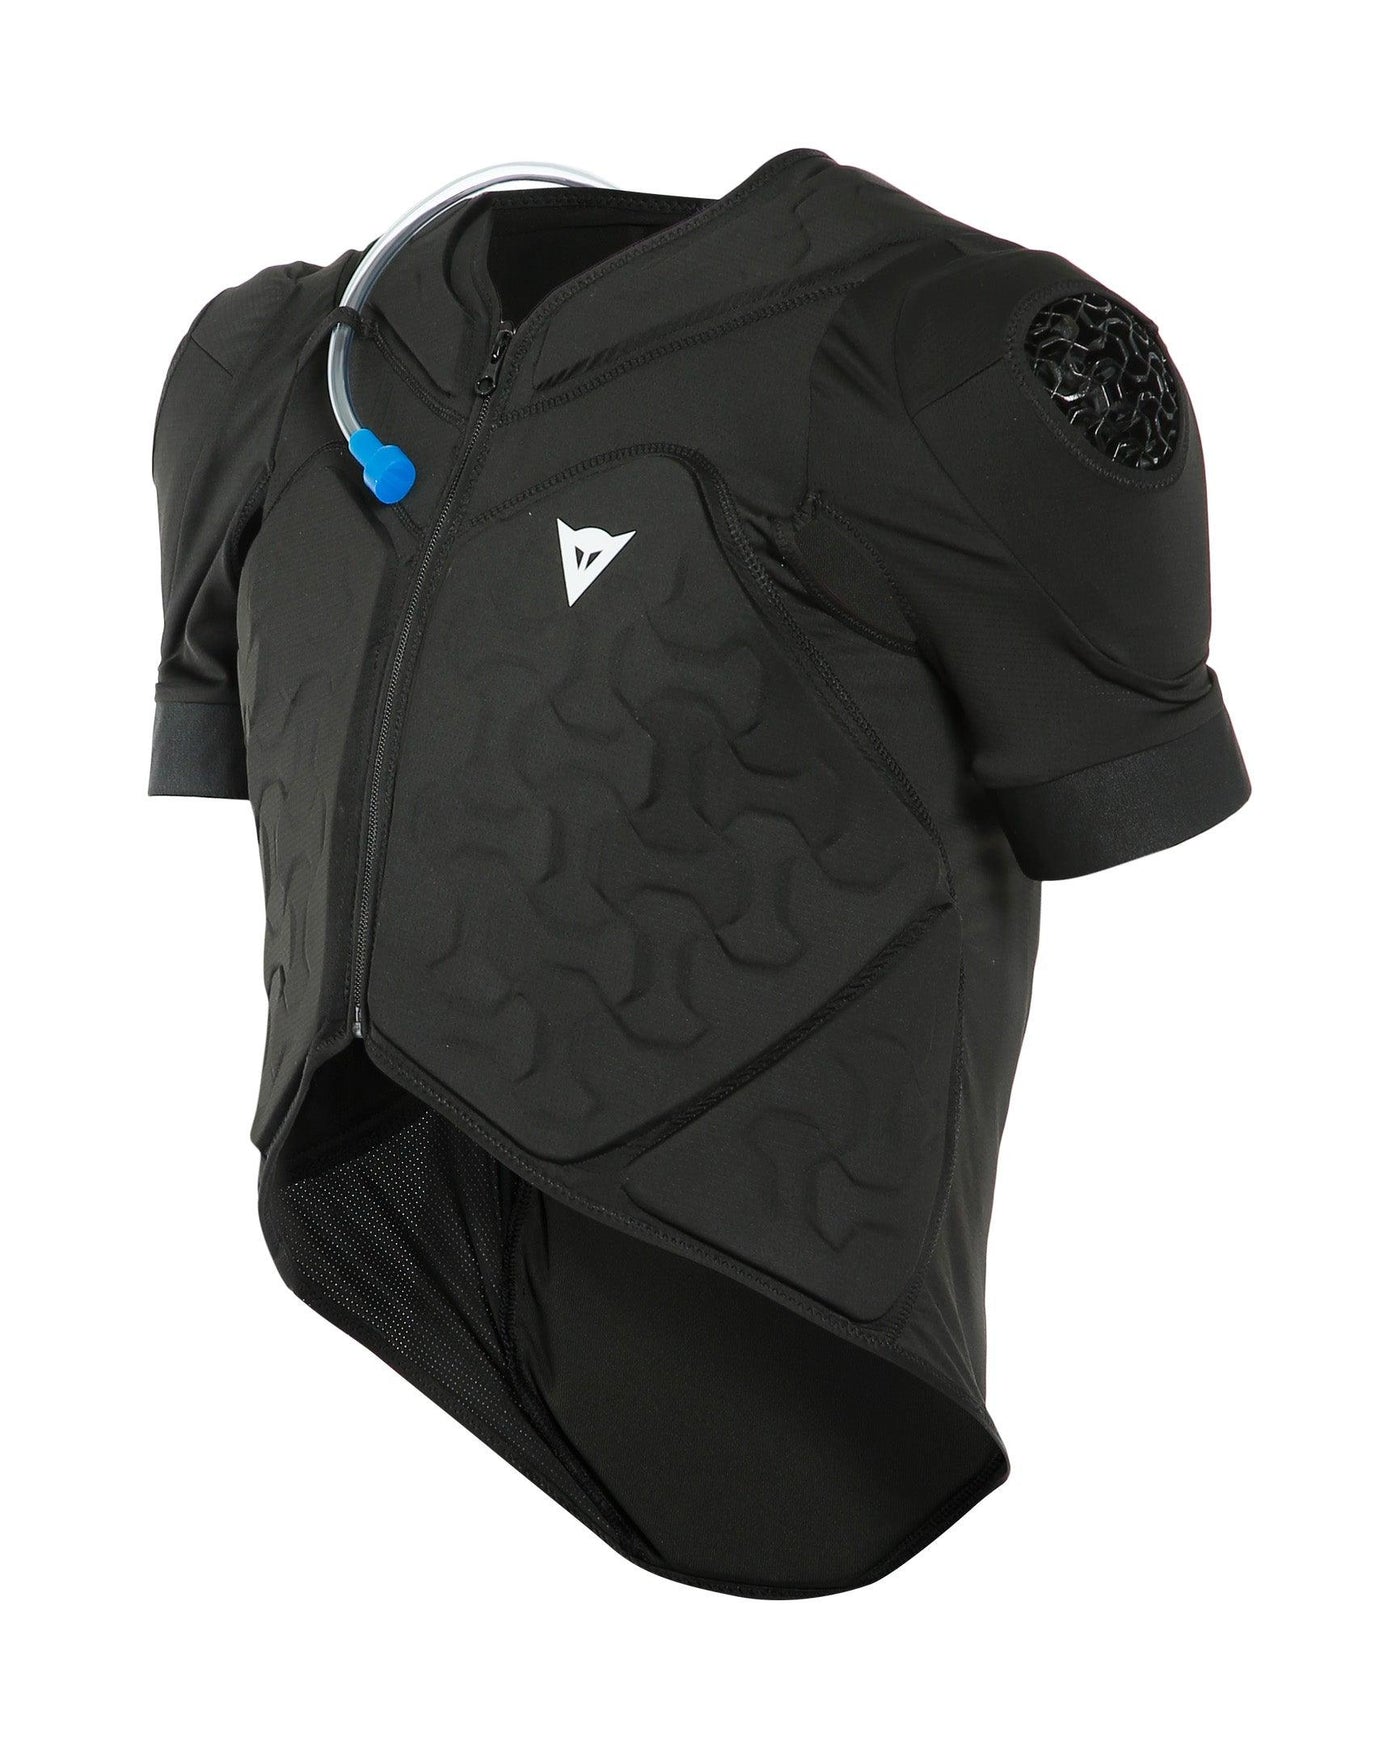 Dainese Rival Pro Vest, Armor + Hydration Pack - Sprocket & Gear